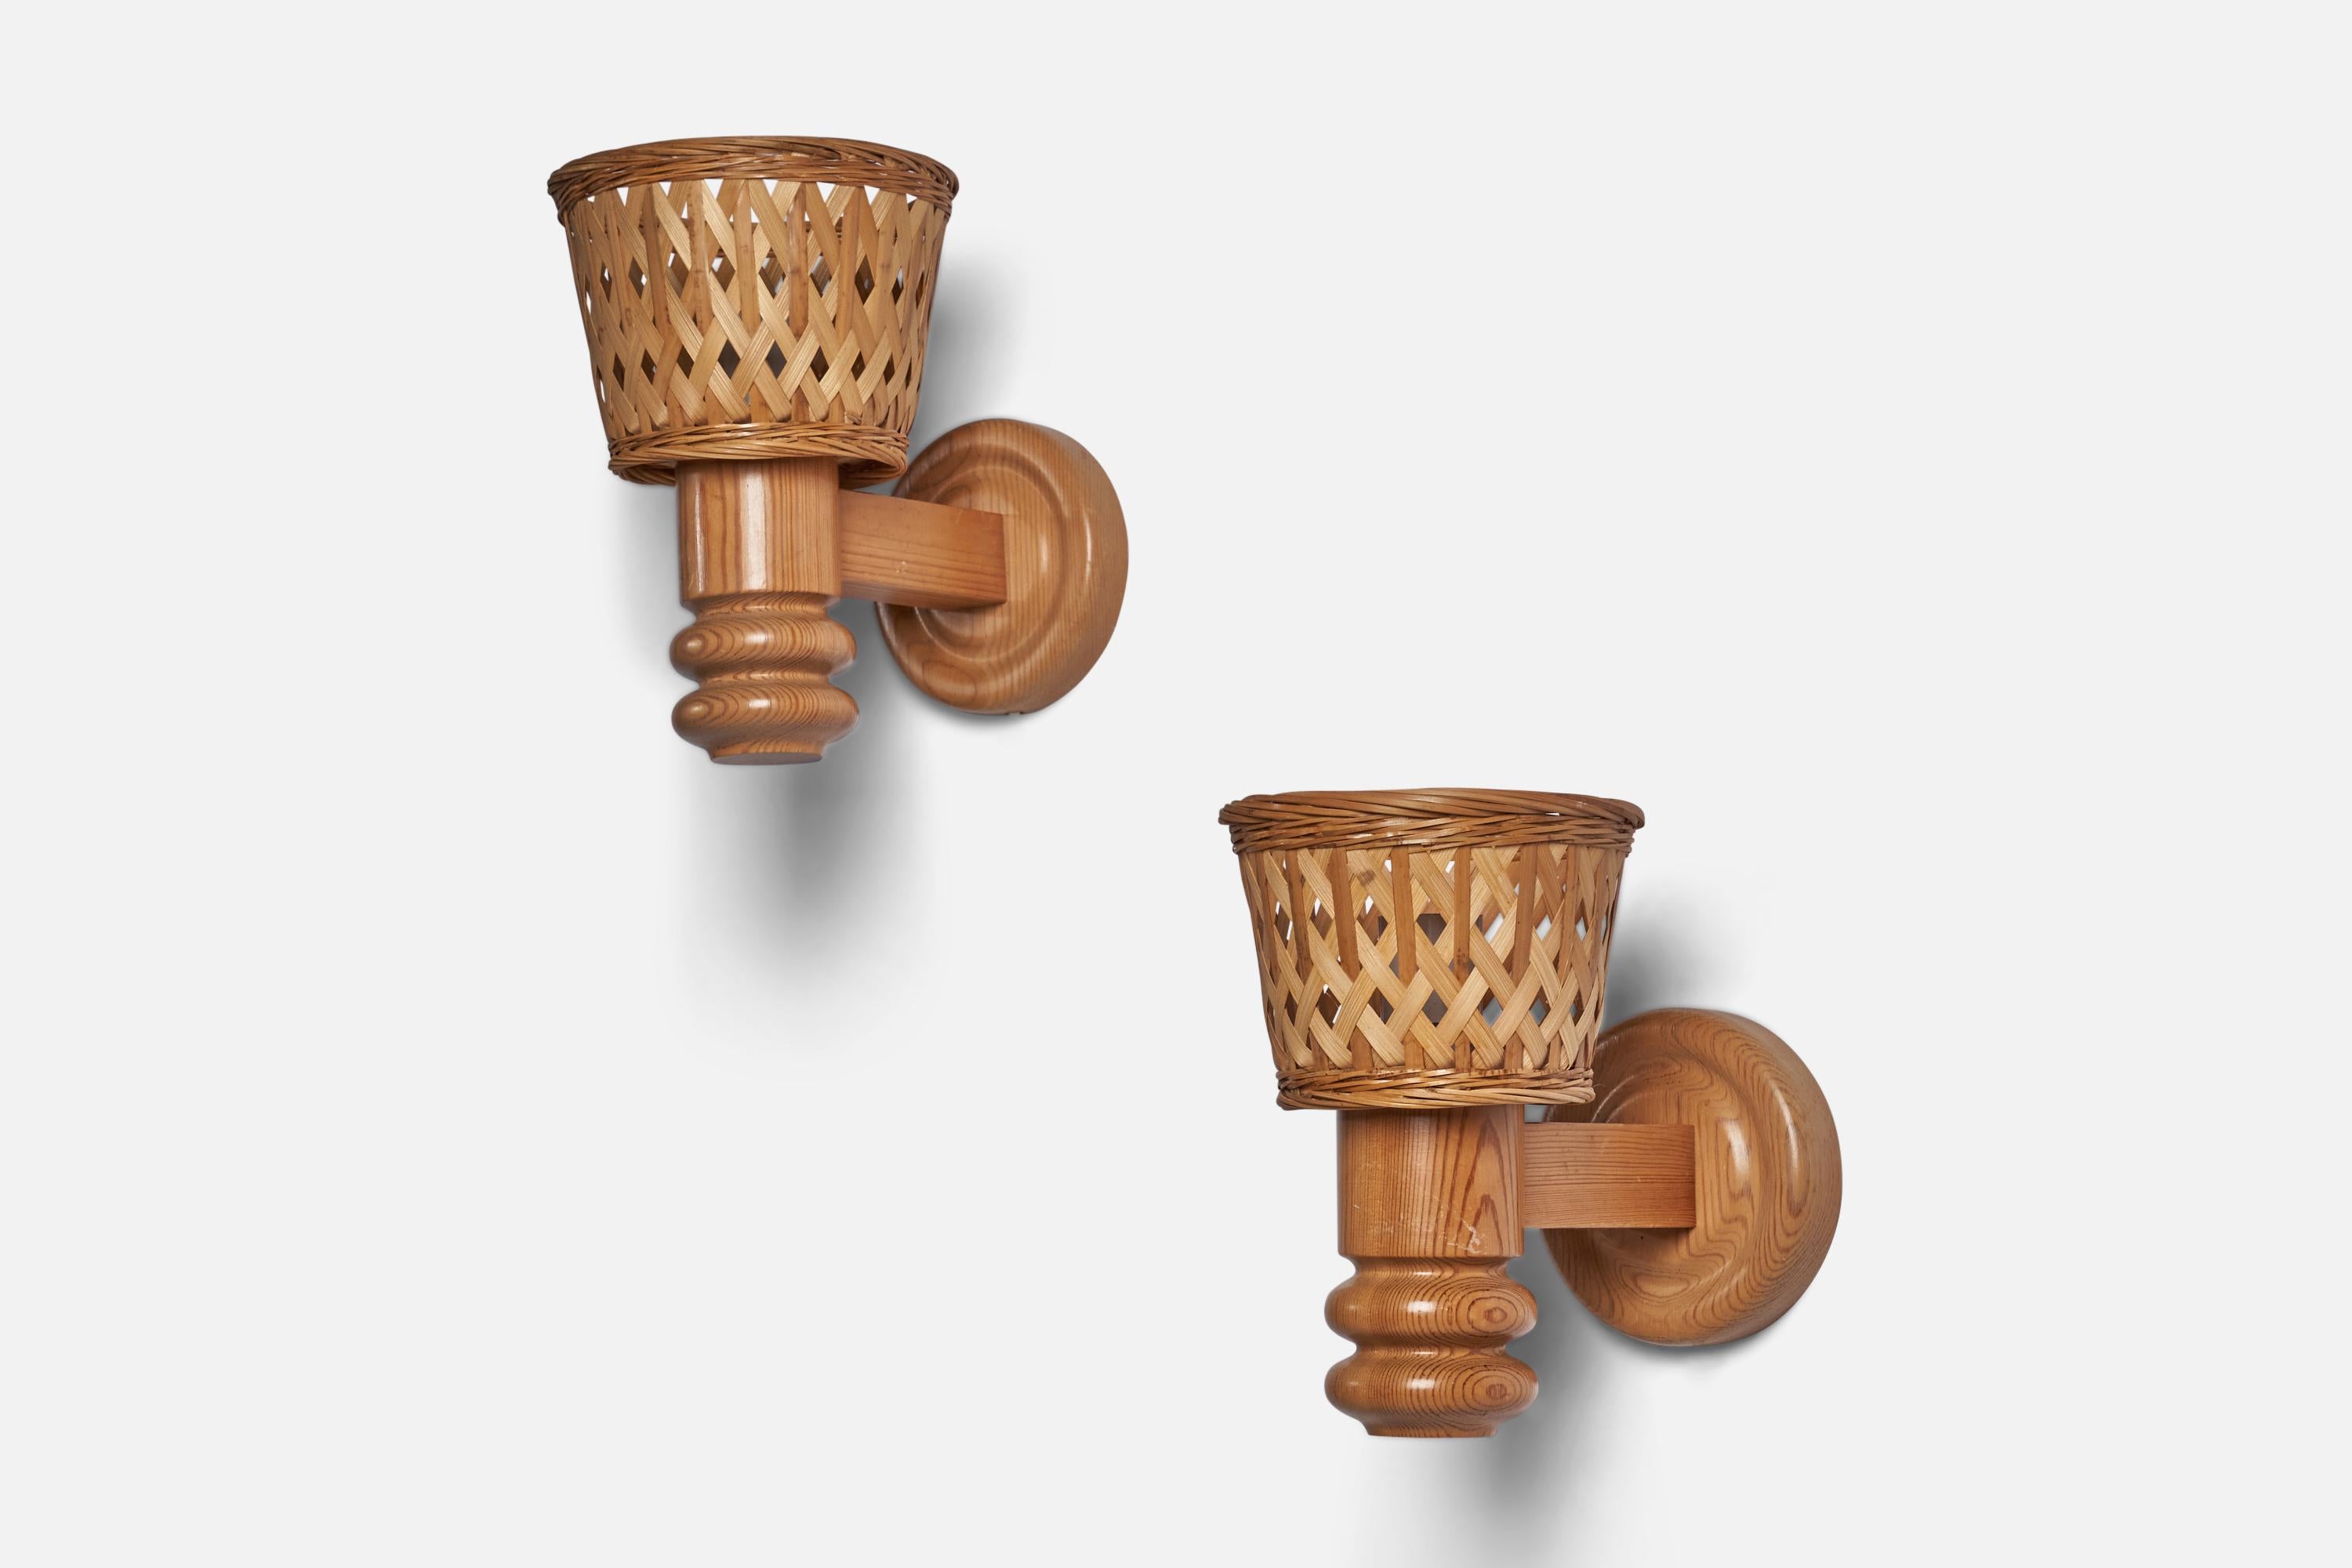 A pair of pine and rattan wall lights designed and produced in Sweden, c. 1970s.

Overall Dimensions (inches): 9.75” H x 6.25” W x 10.5” D
Back Plate Dimensions (inches): 5.4” Diameter
Bulb Specifications: E-26 Bulb
Number of Sockets: 1
All lighting